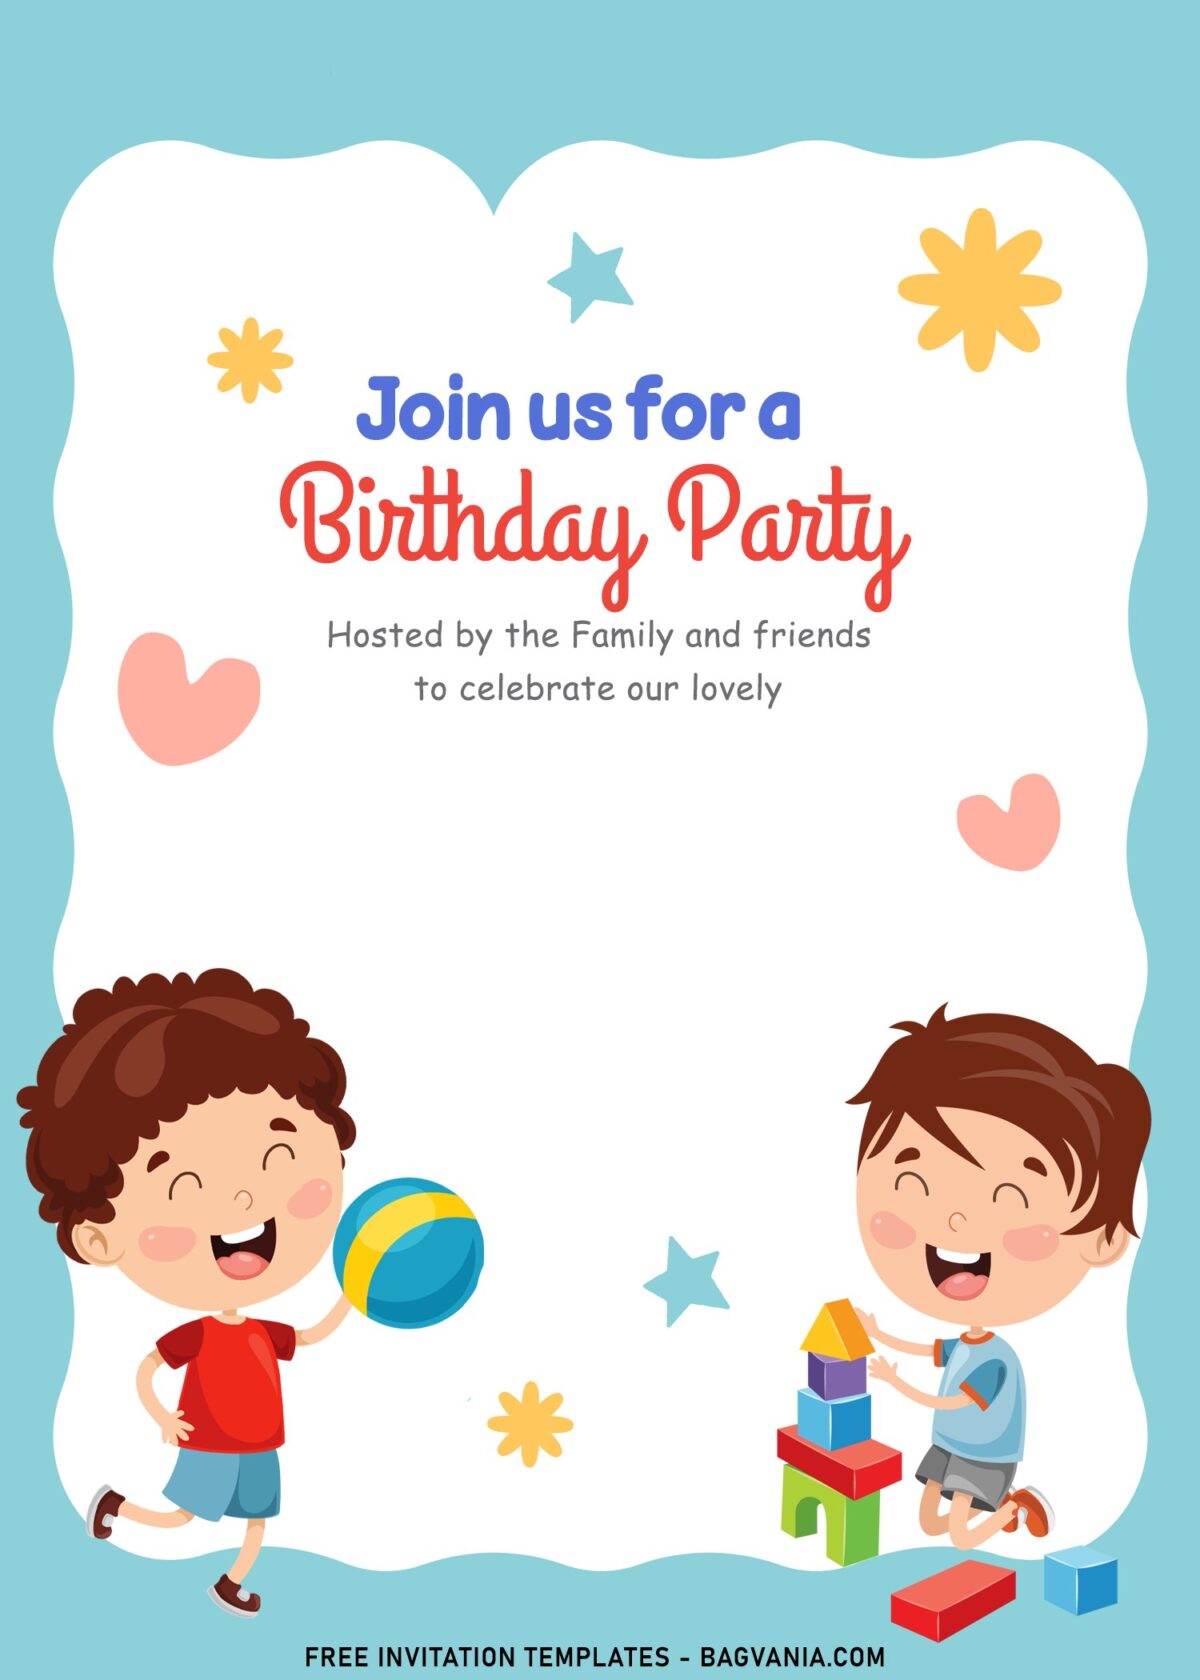 9+ Playful And Adorable Kids Birthday Invitation Templates For All Ages with adorable little boys are playing happily